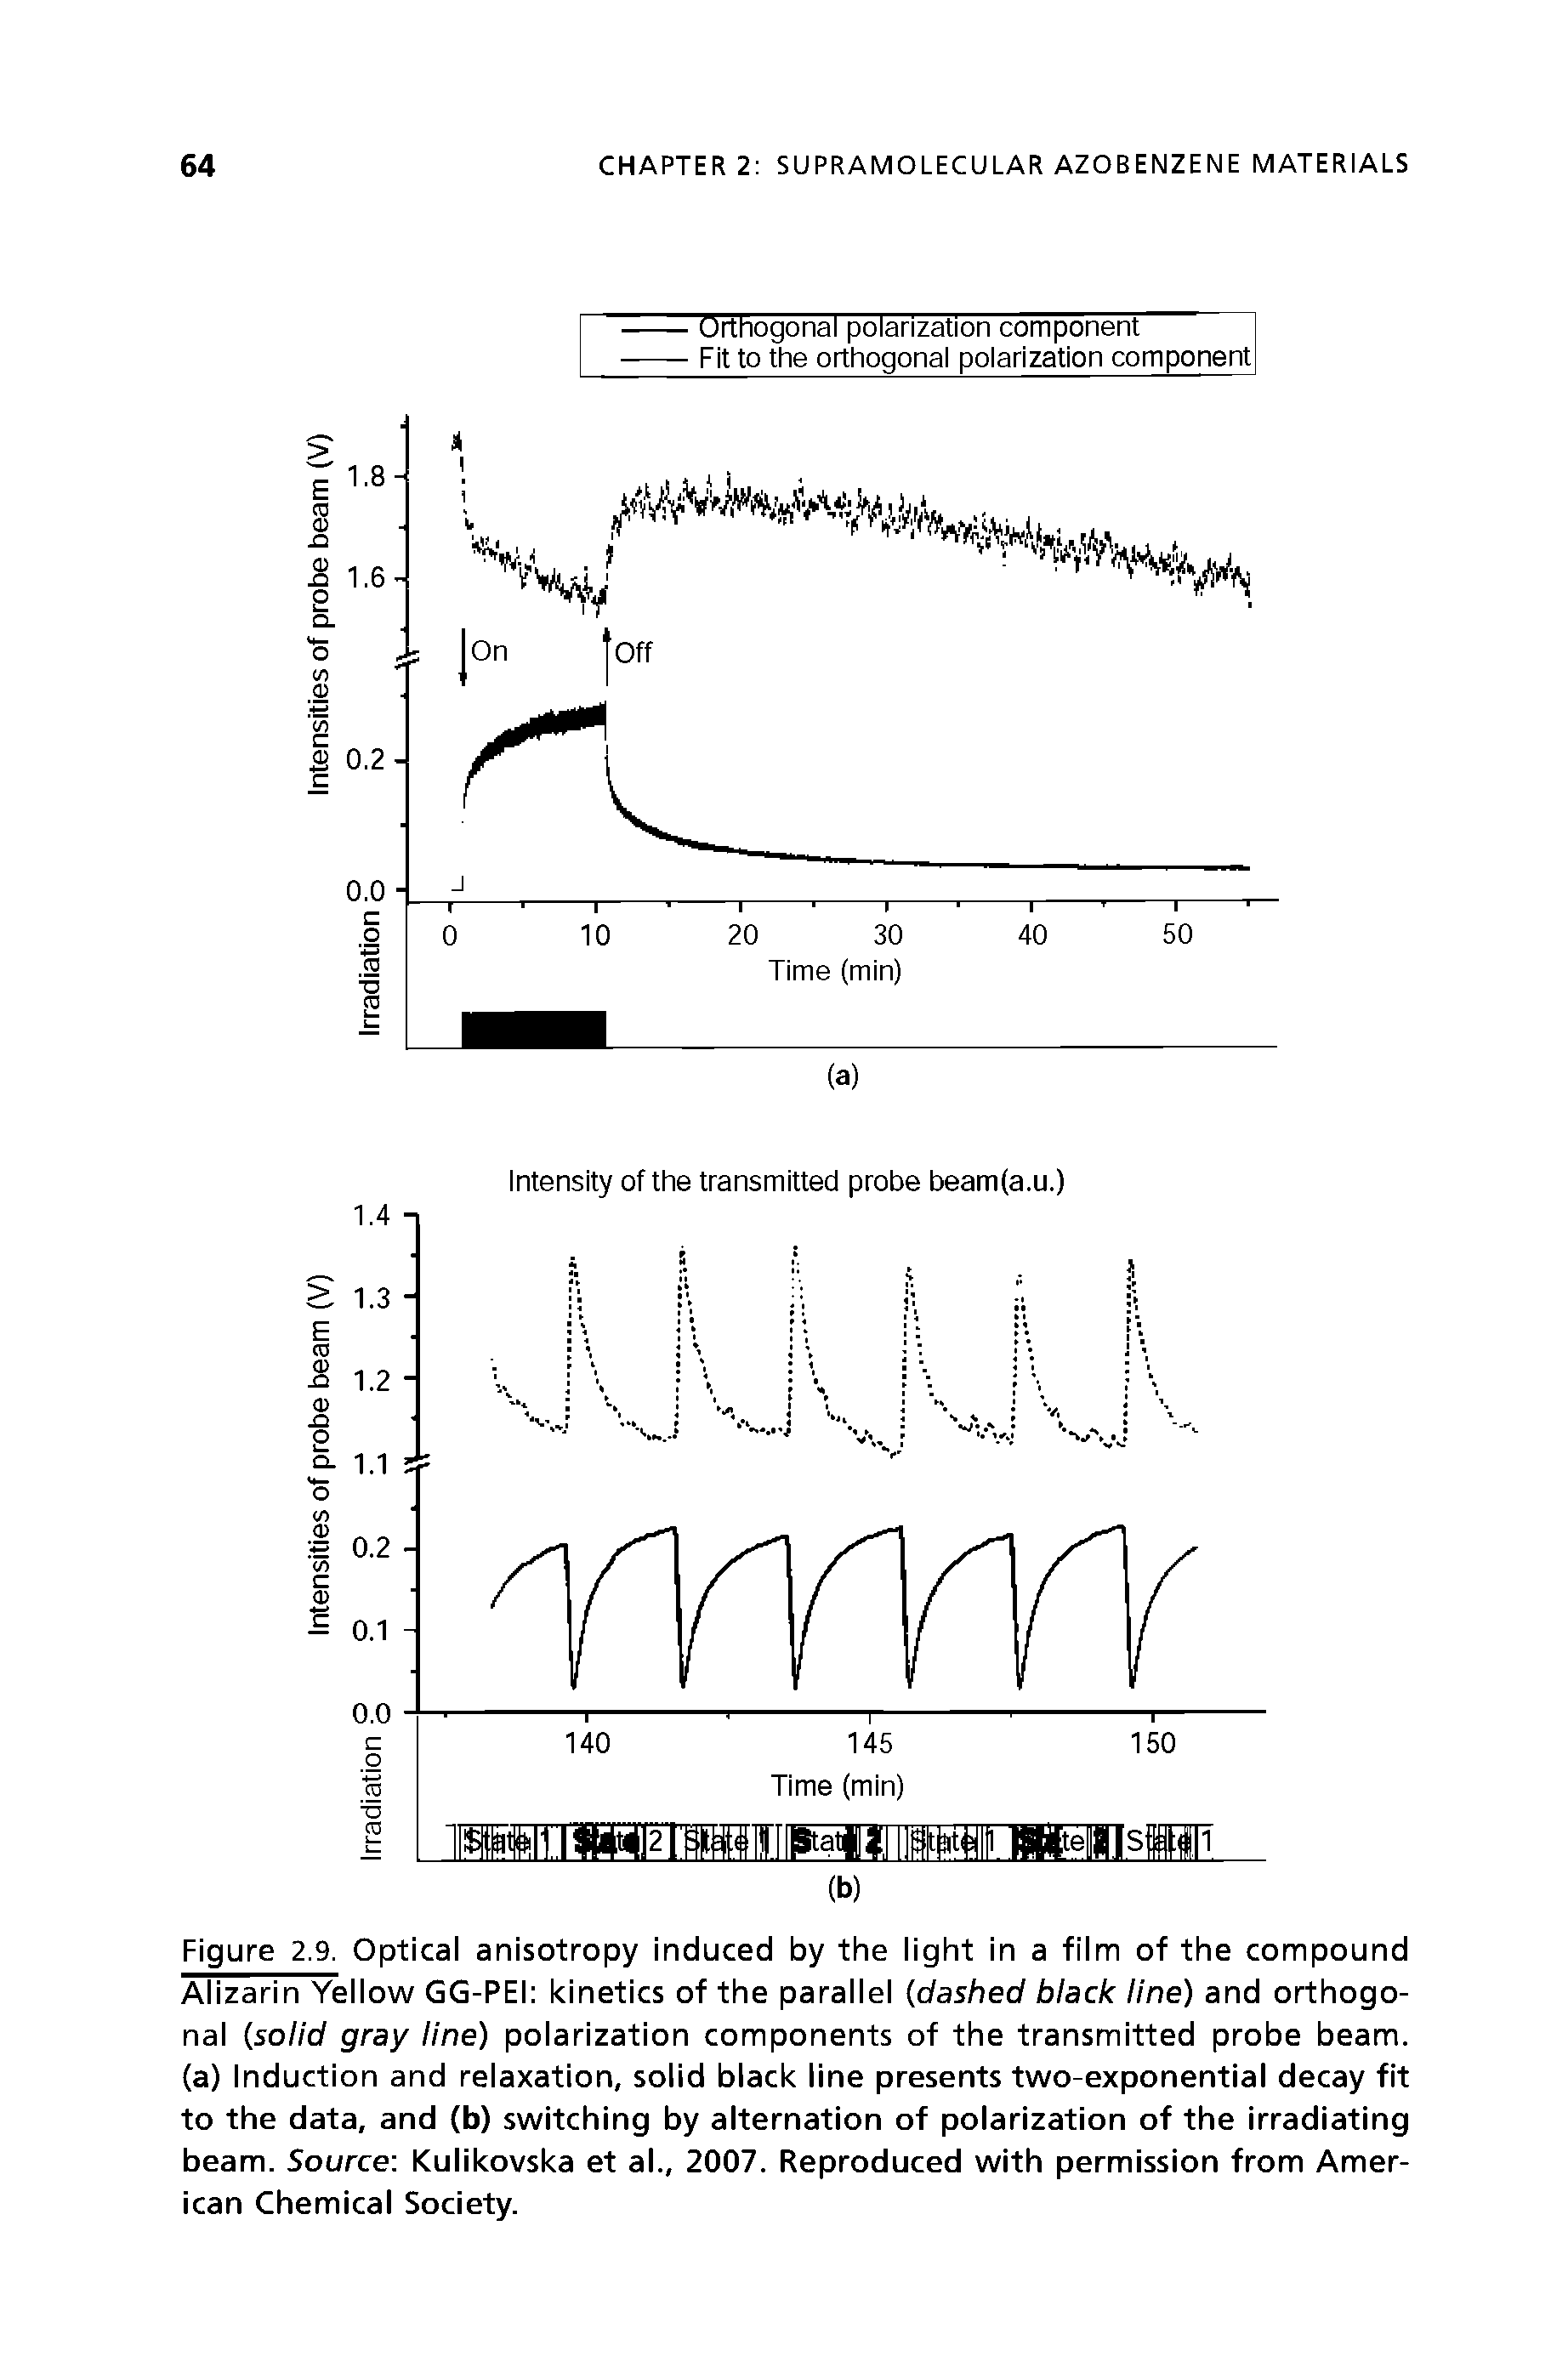 Figure 2.9. Optical anisotropy induced by the light in a film of the compound Alizarin Yellow GG-PEI kinetics of the parallel (dashed black line) and orthogonal (solid gray line) polarization components of the transmitted probe beam, (a) Induction and relaxation, solid black line presents two-exponential decay fit to the data, and (b) switching by alternation of polarization of the irradiating beam. Source Kulikovska et al., 2007. Reproduced with permission from American Chemical Society.